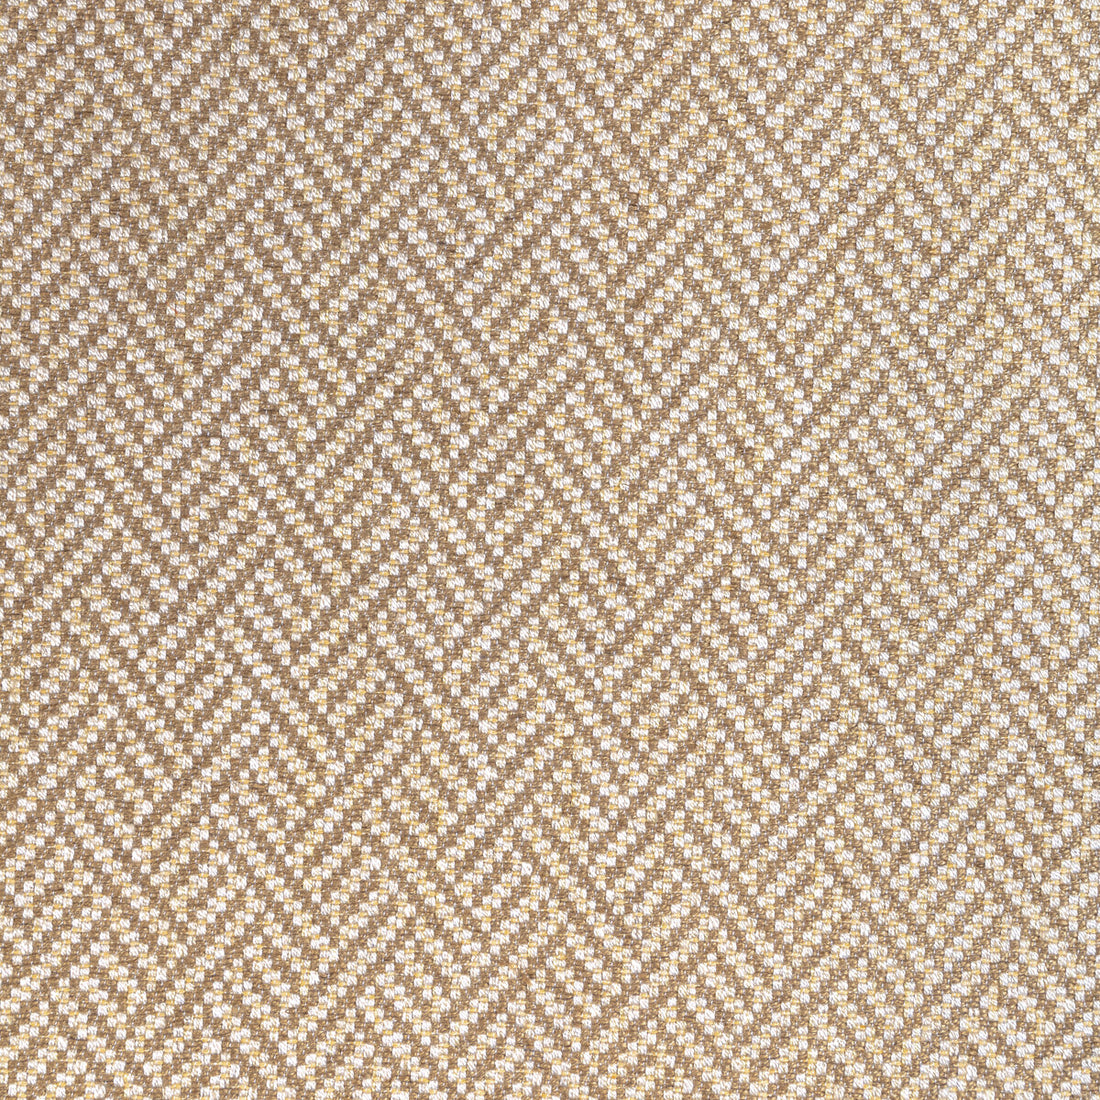 Colbert Weave fabric in beige color - pattern 8022108.16.0 - by Brunschwig &amp; Fils in the Lorient Weaves collection